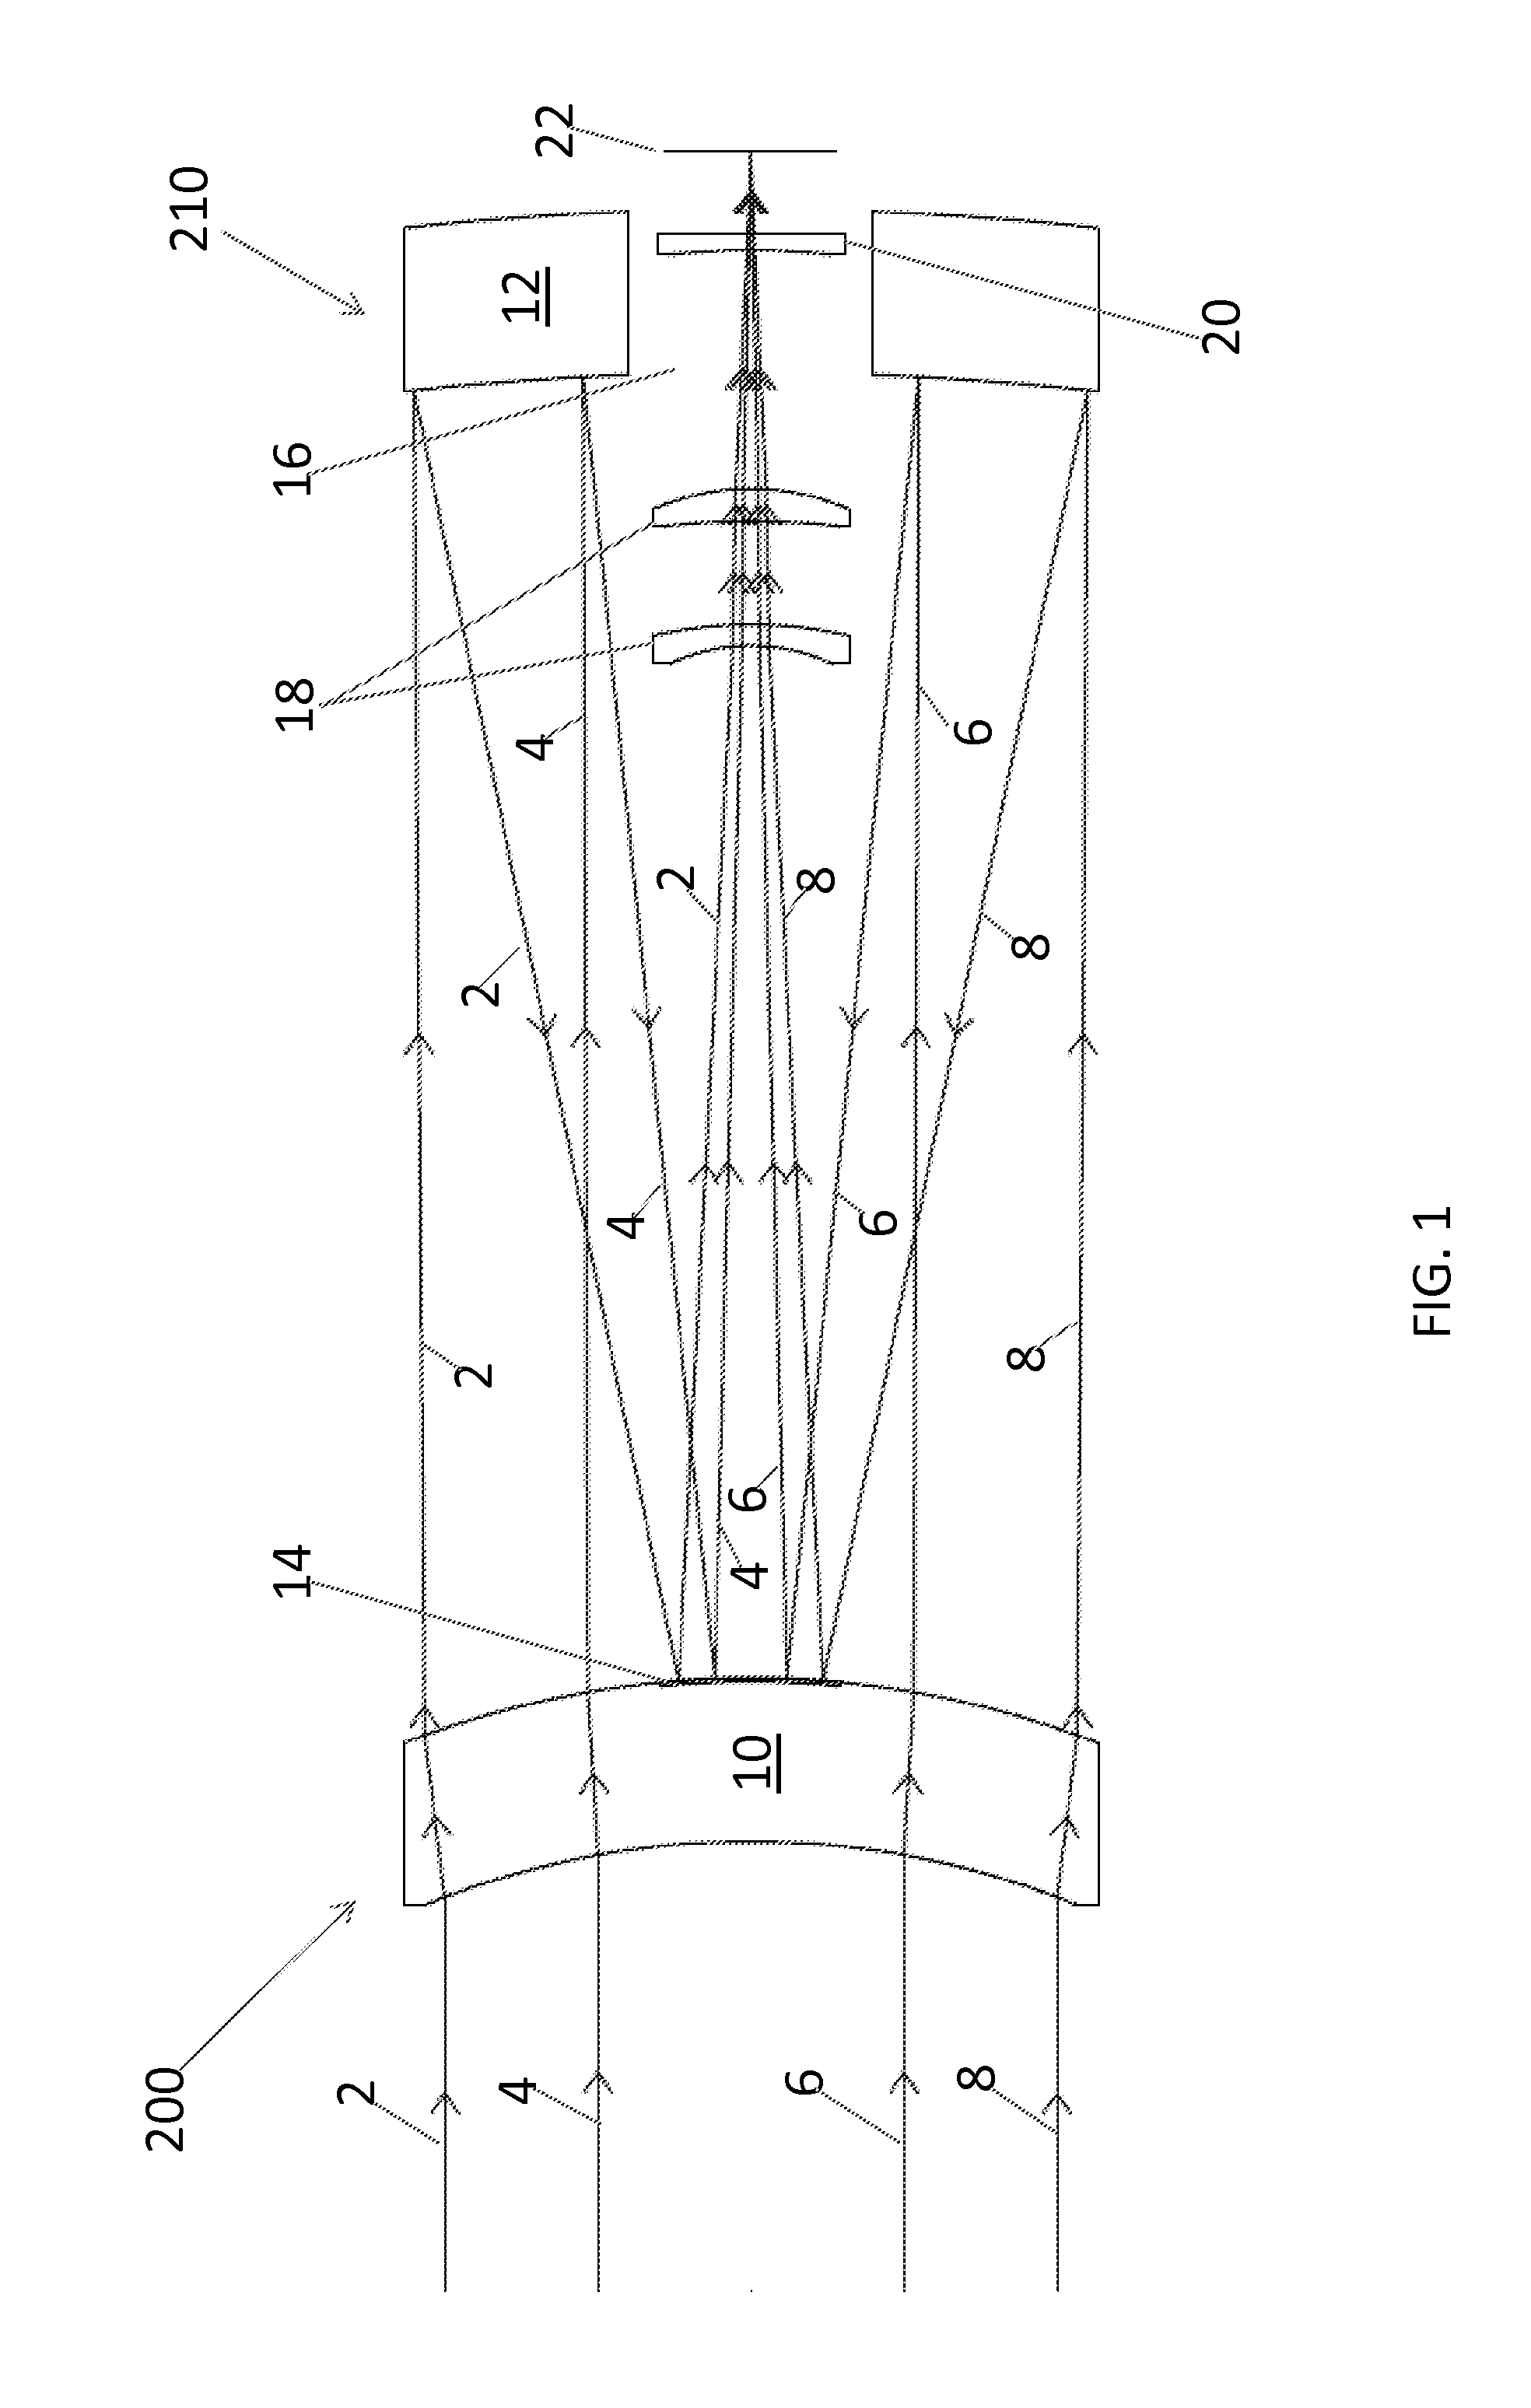 Telescope and telescope array for use in spacecraft